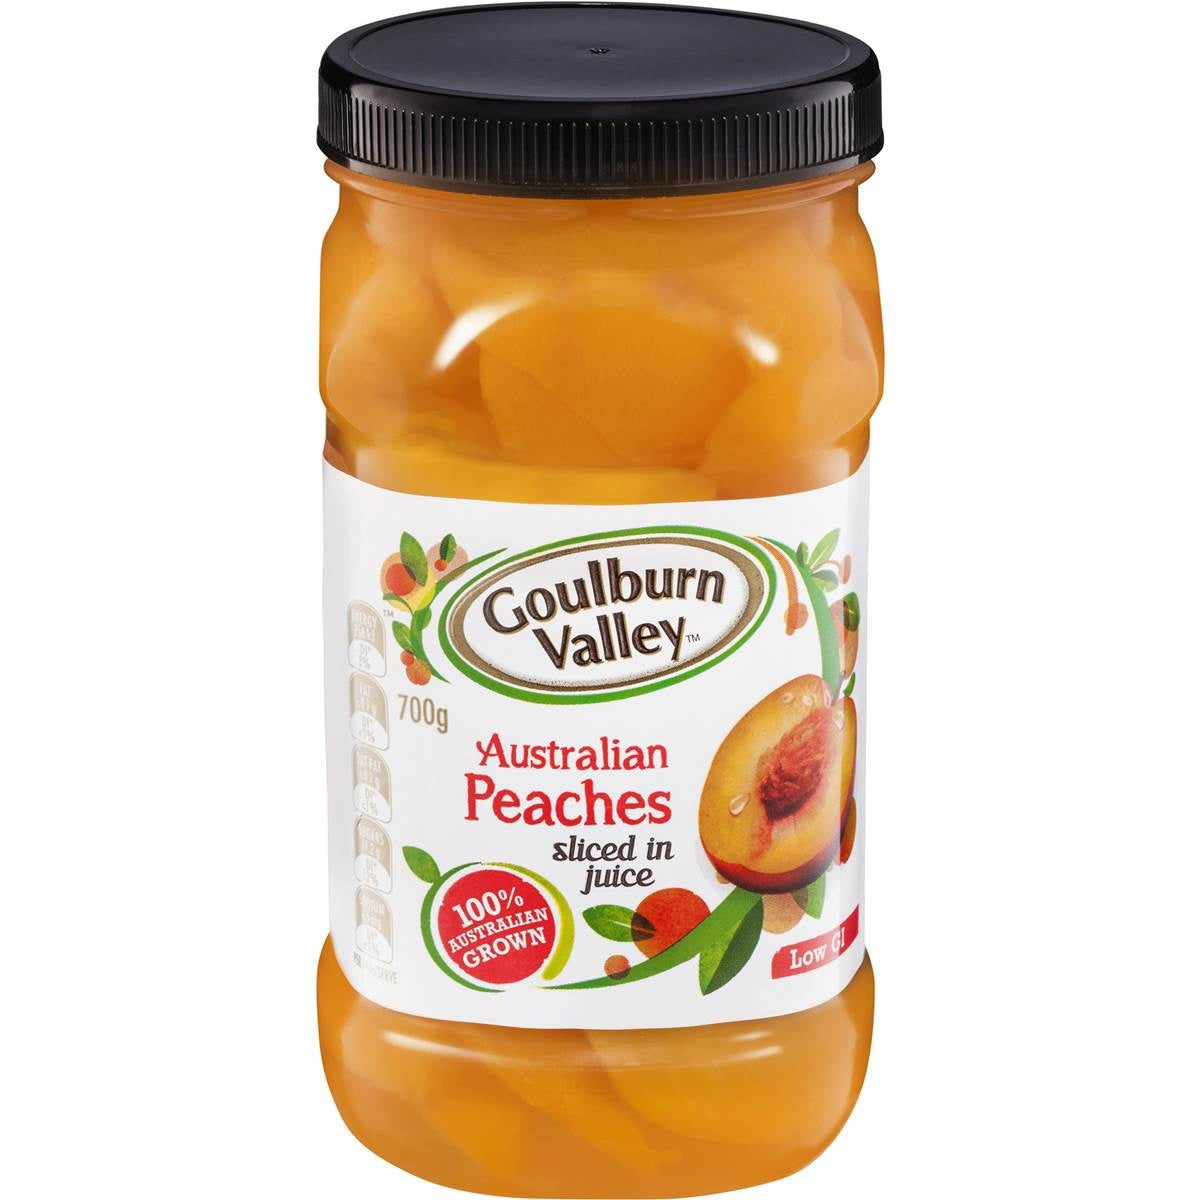 Goulburn Valley Peaches in Juice 700g